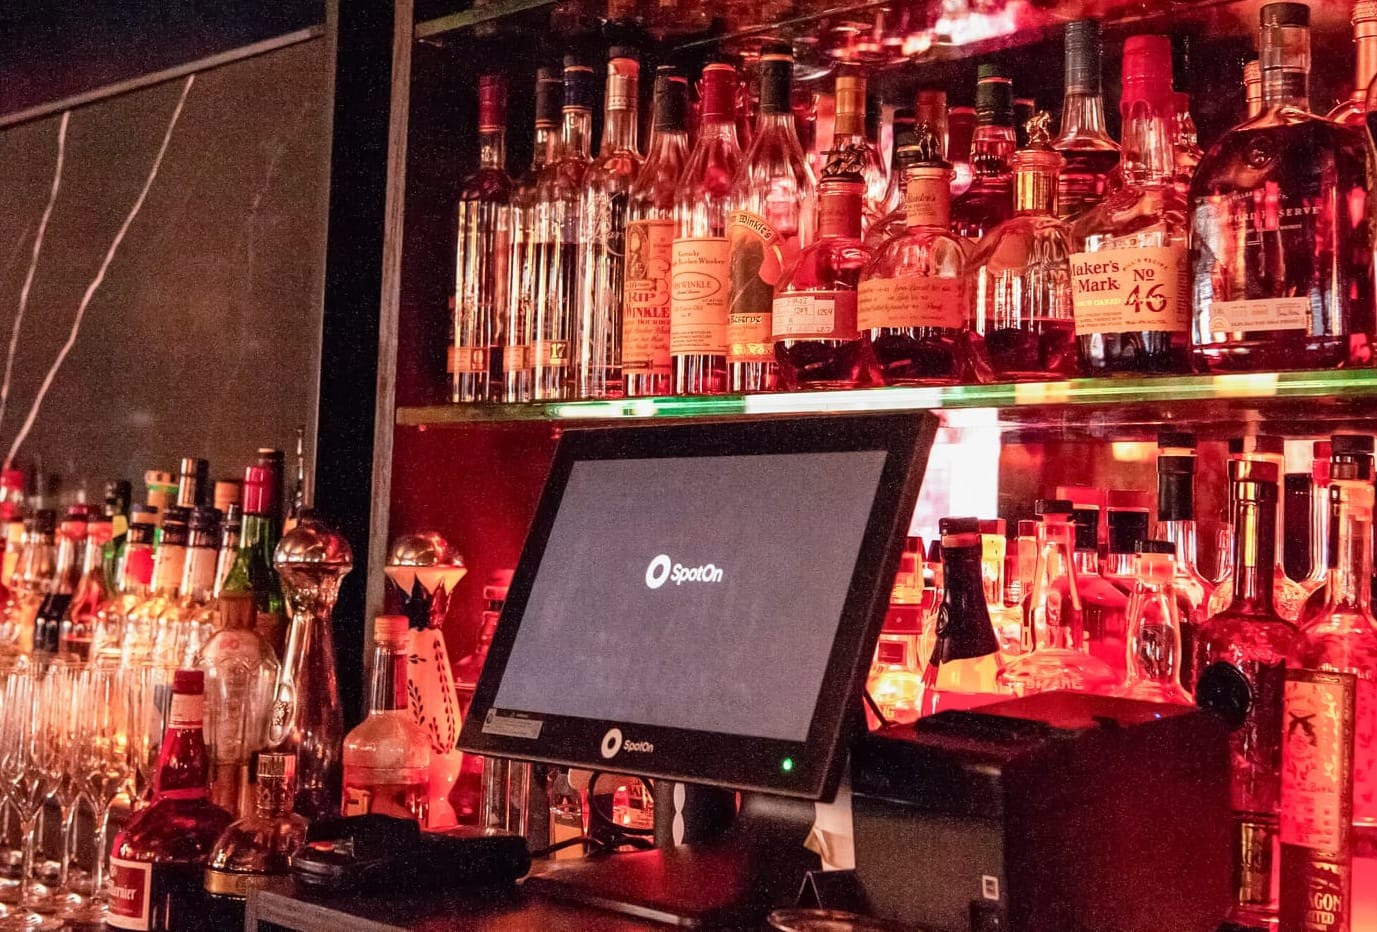 SpotOn point-of-sale system on a bar counter with different drinks in the background.